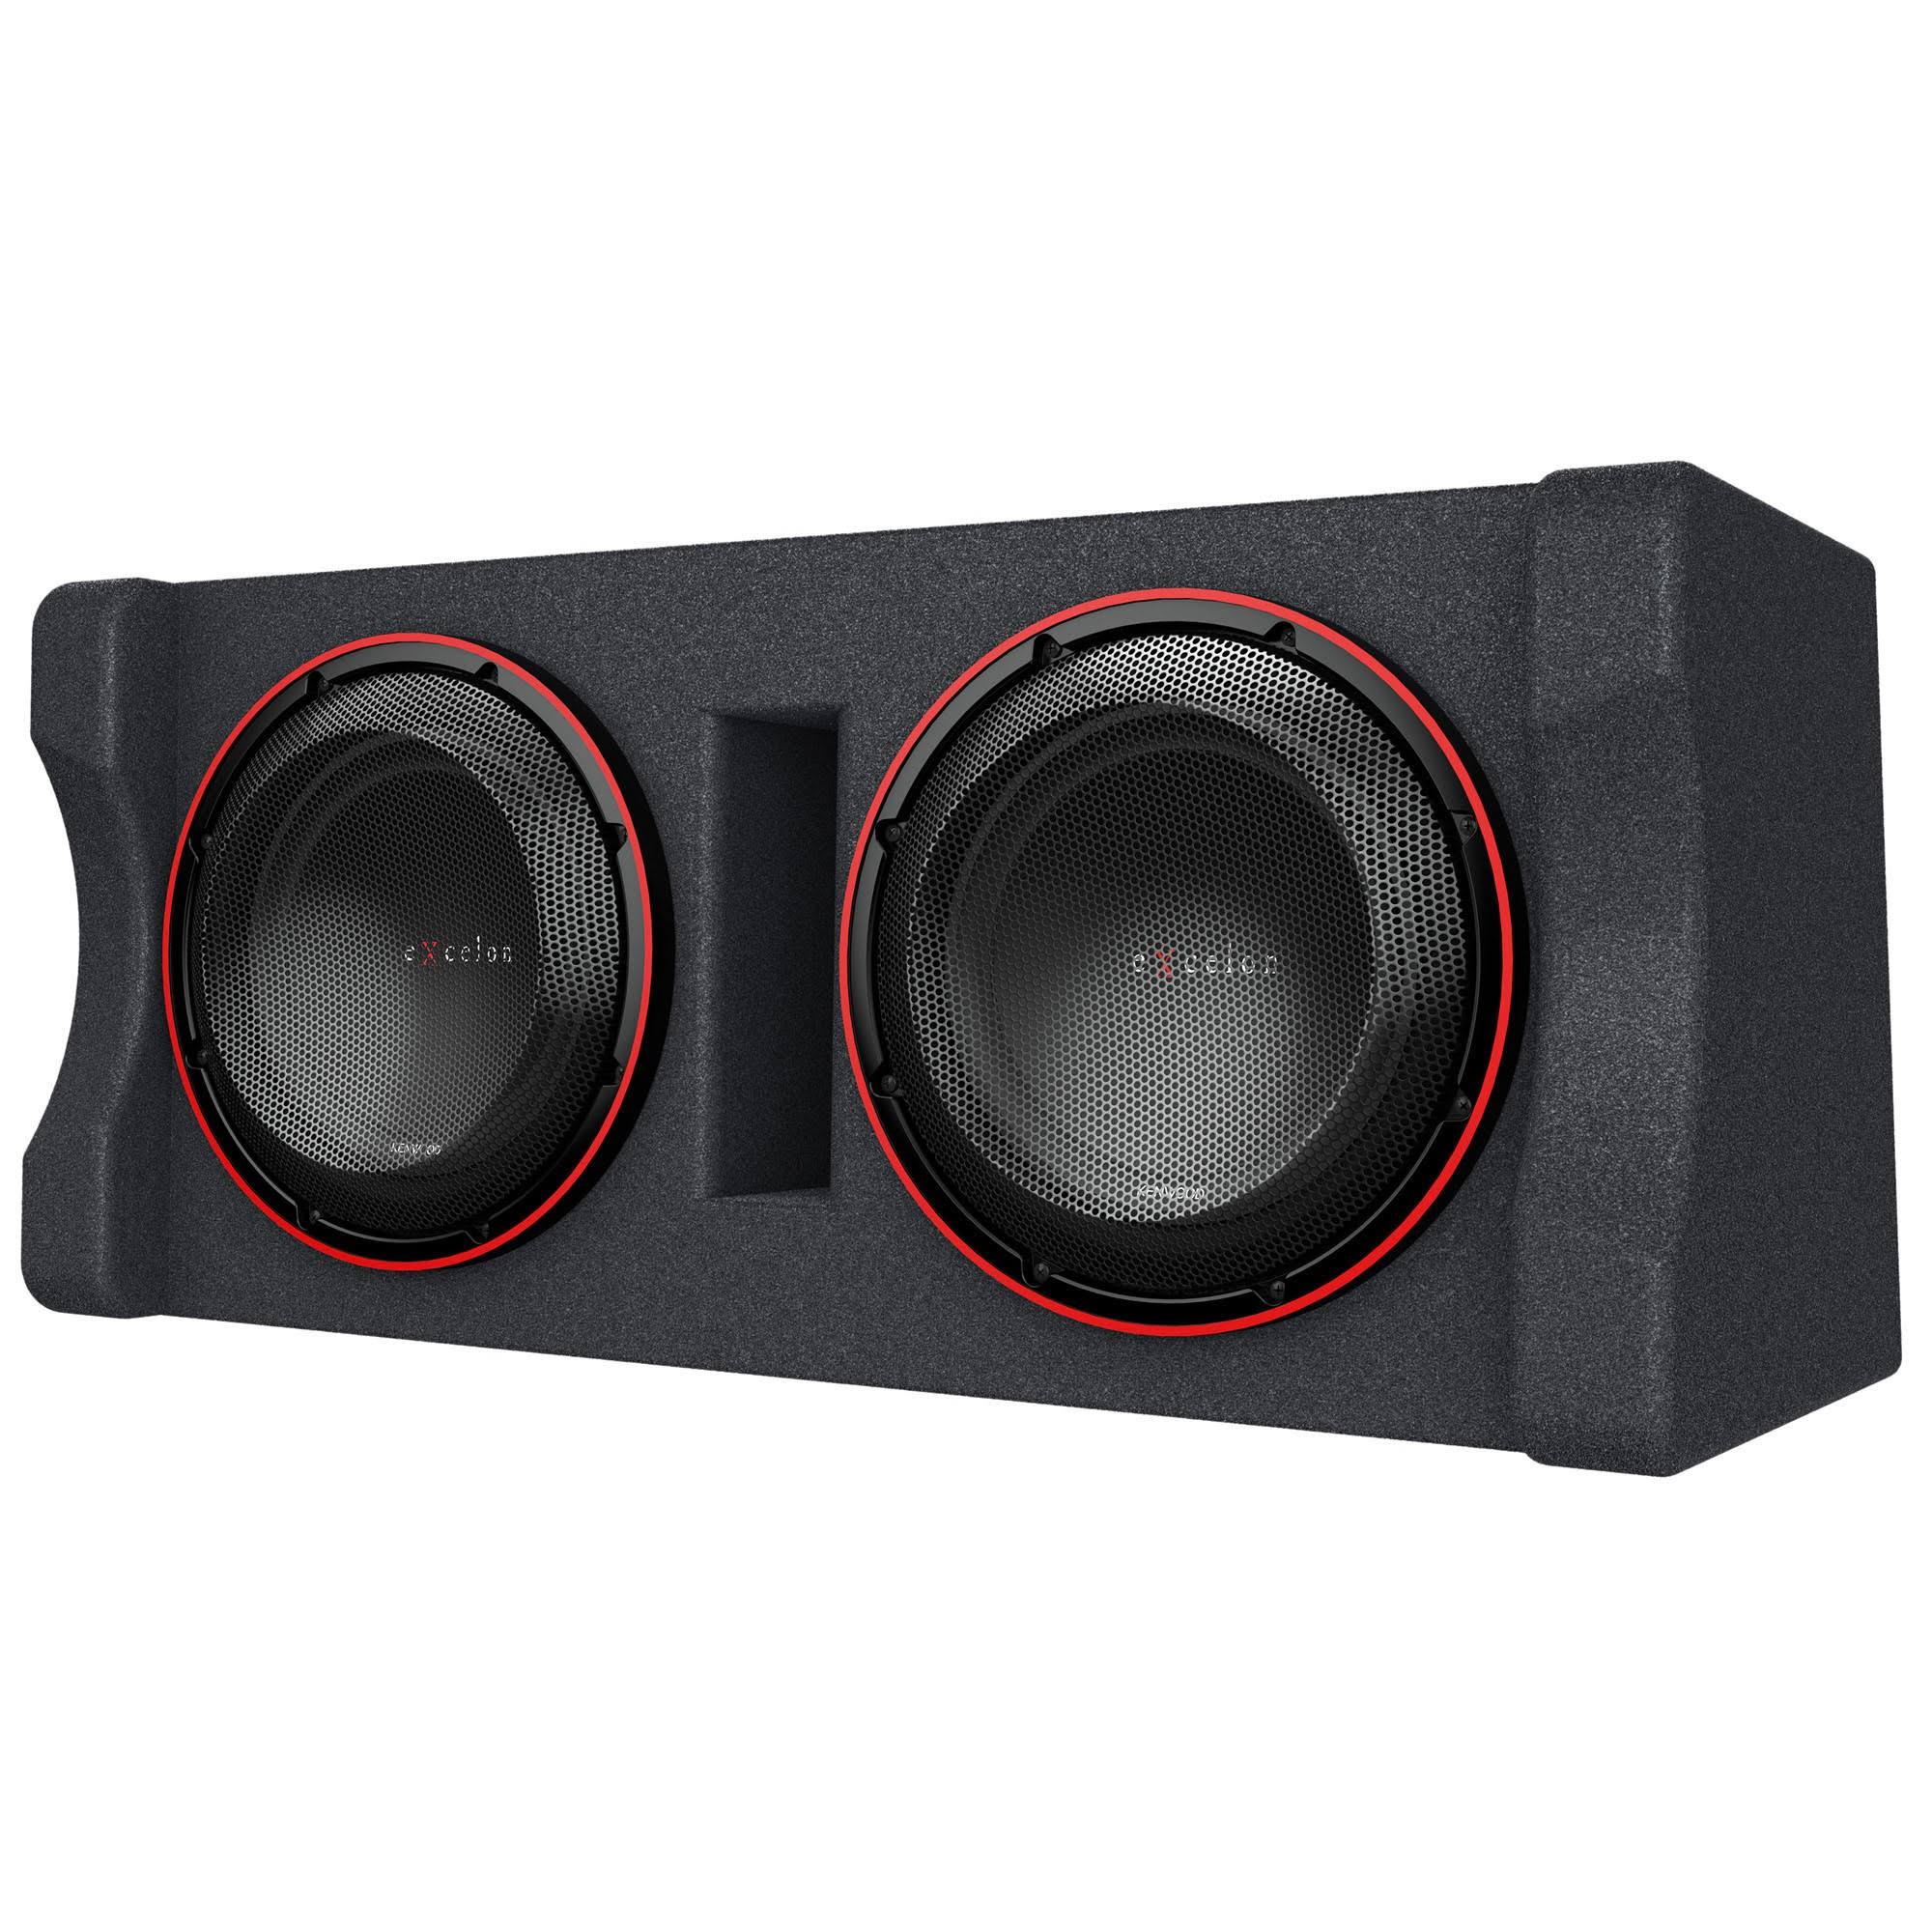 Kenwood Excelon P-XW1221DHP 2-Ohm Ported Enclosure With Two 12" Subwoofers | Dual 12" Preloaded High Power Subwoofer Enclosure